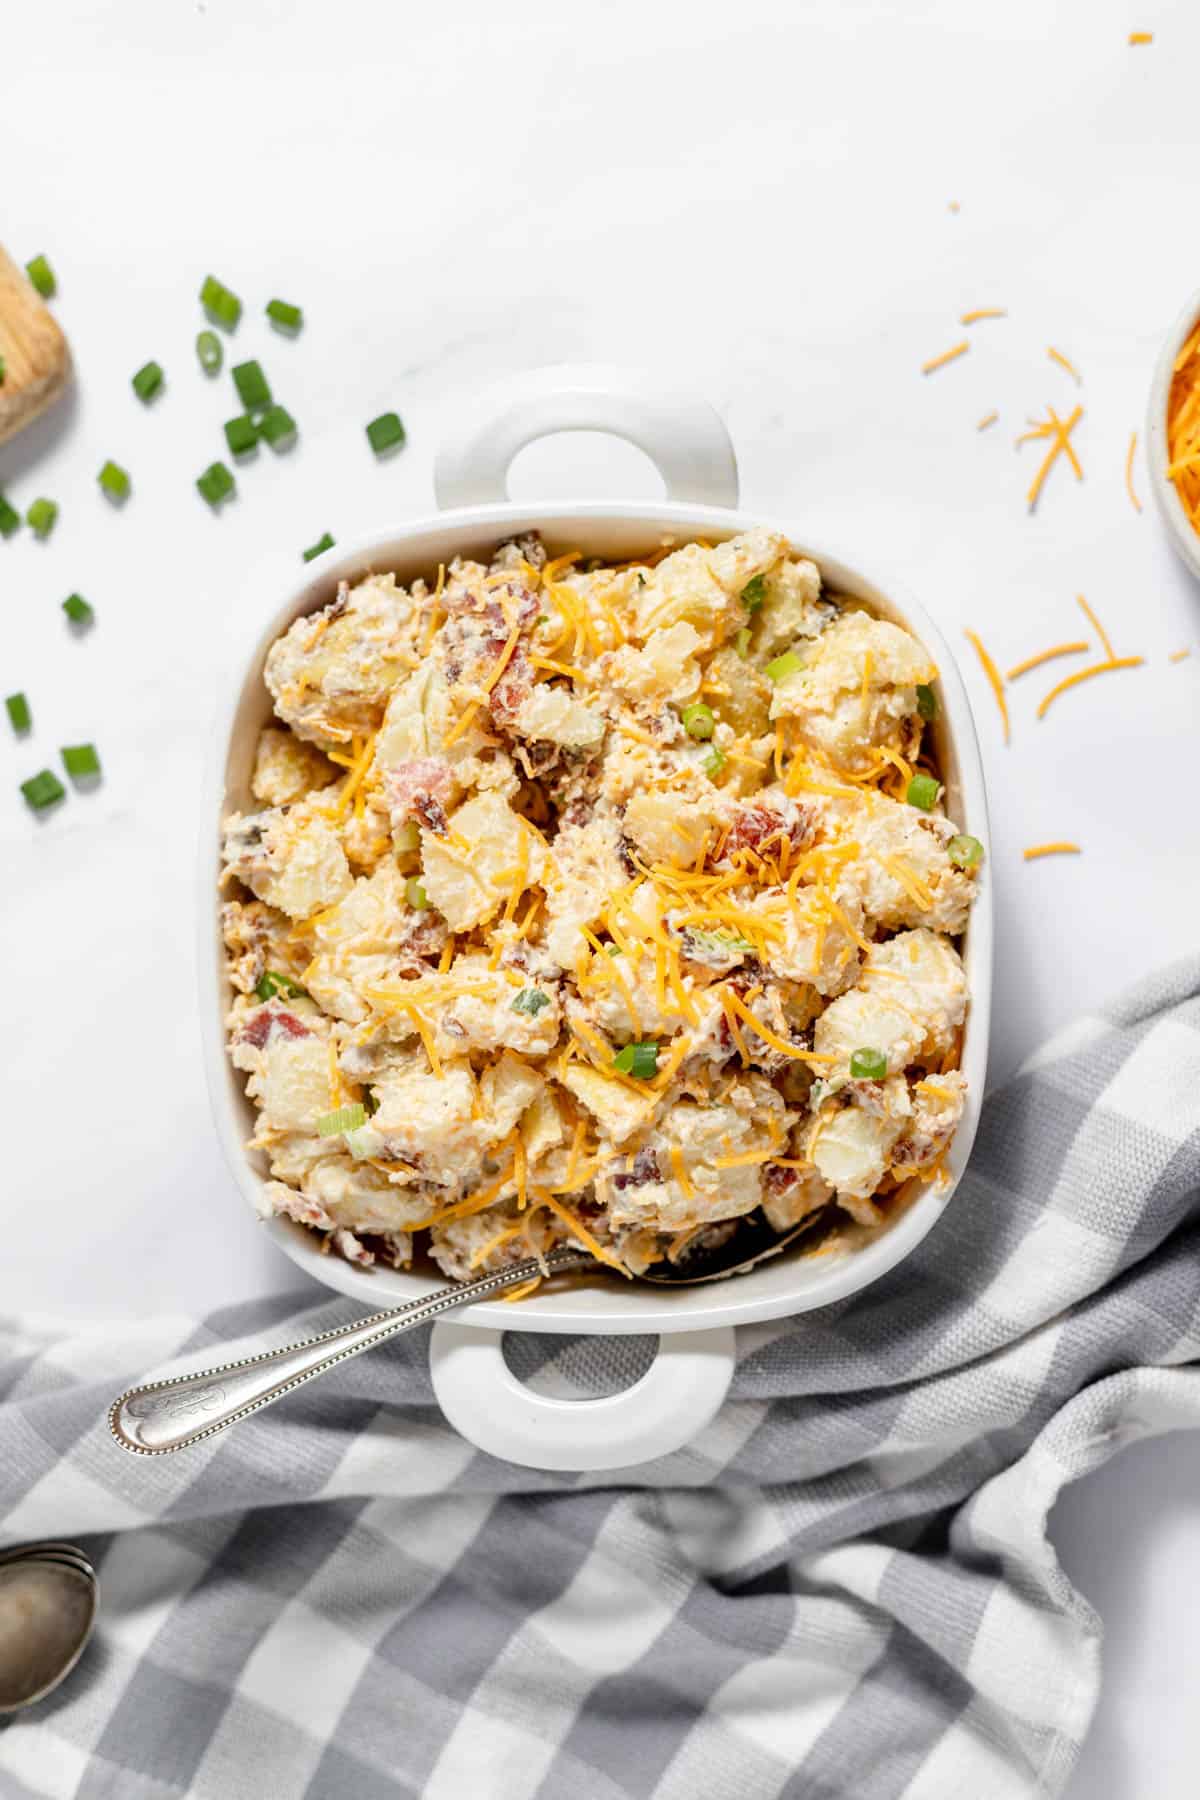 Loaded baked potato salad in a serving dish.